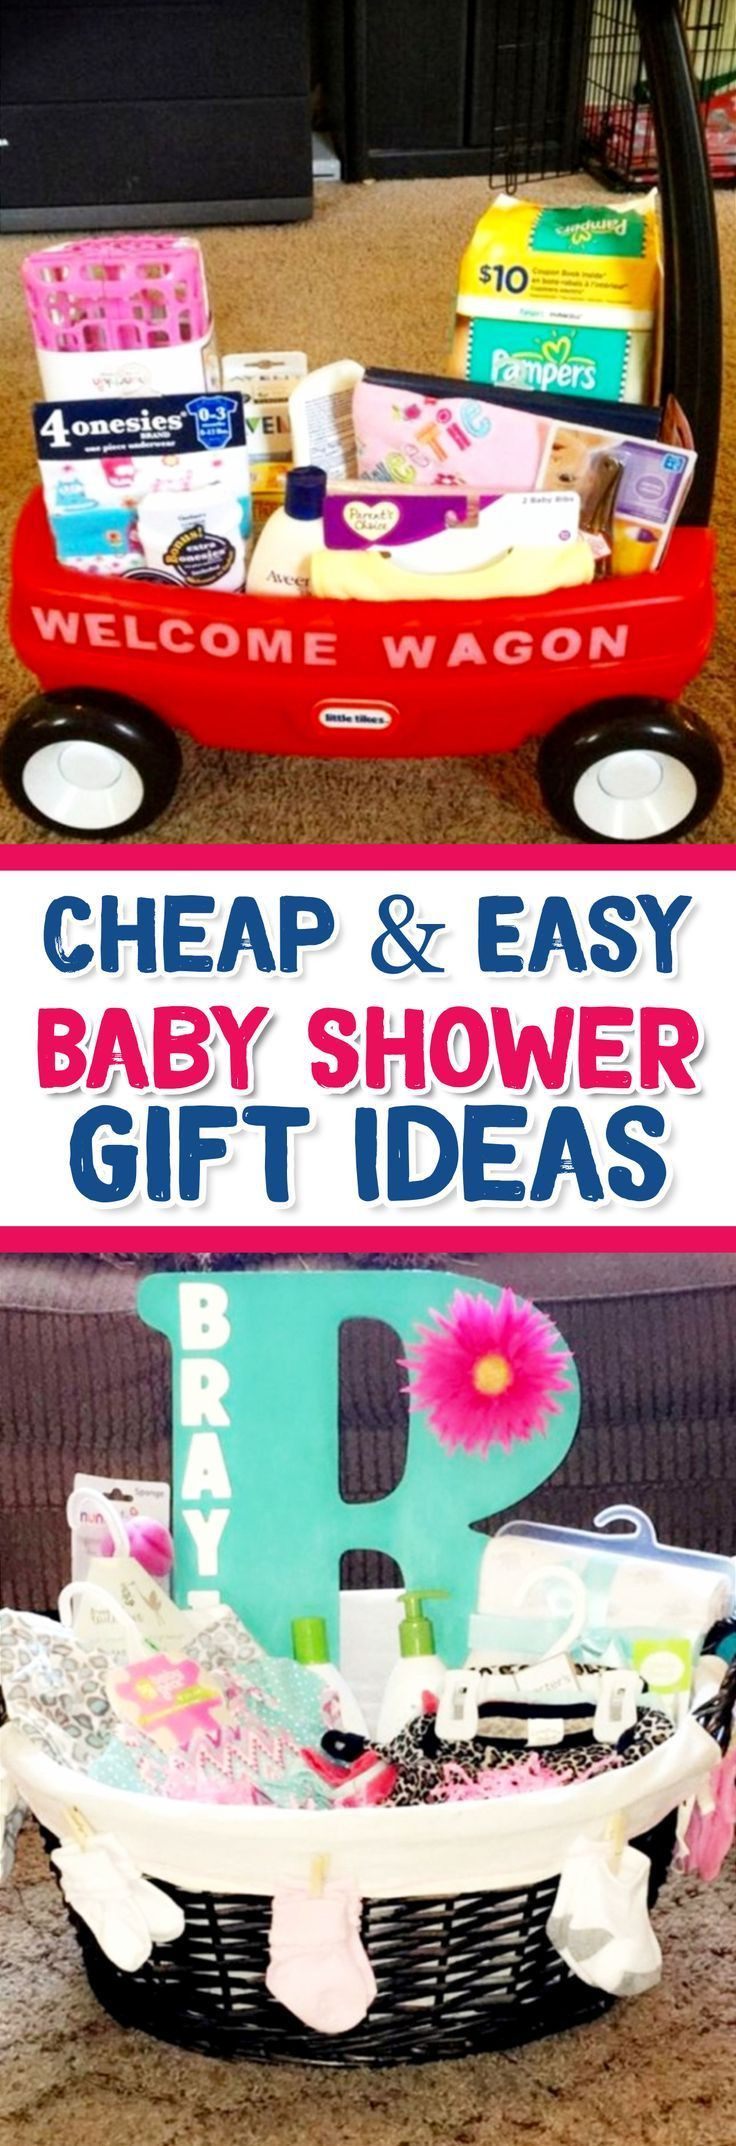 Cheap Baby Gift Ideas
 Best 25 Cheap baby shower decorations ideas on Pinterest